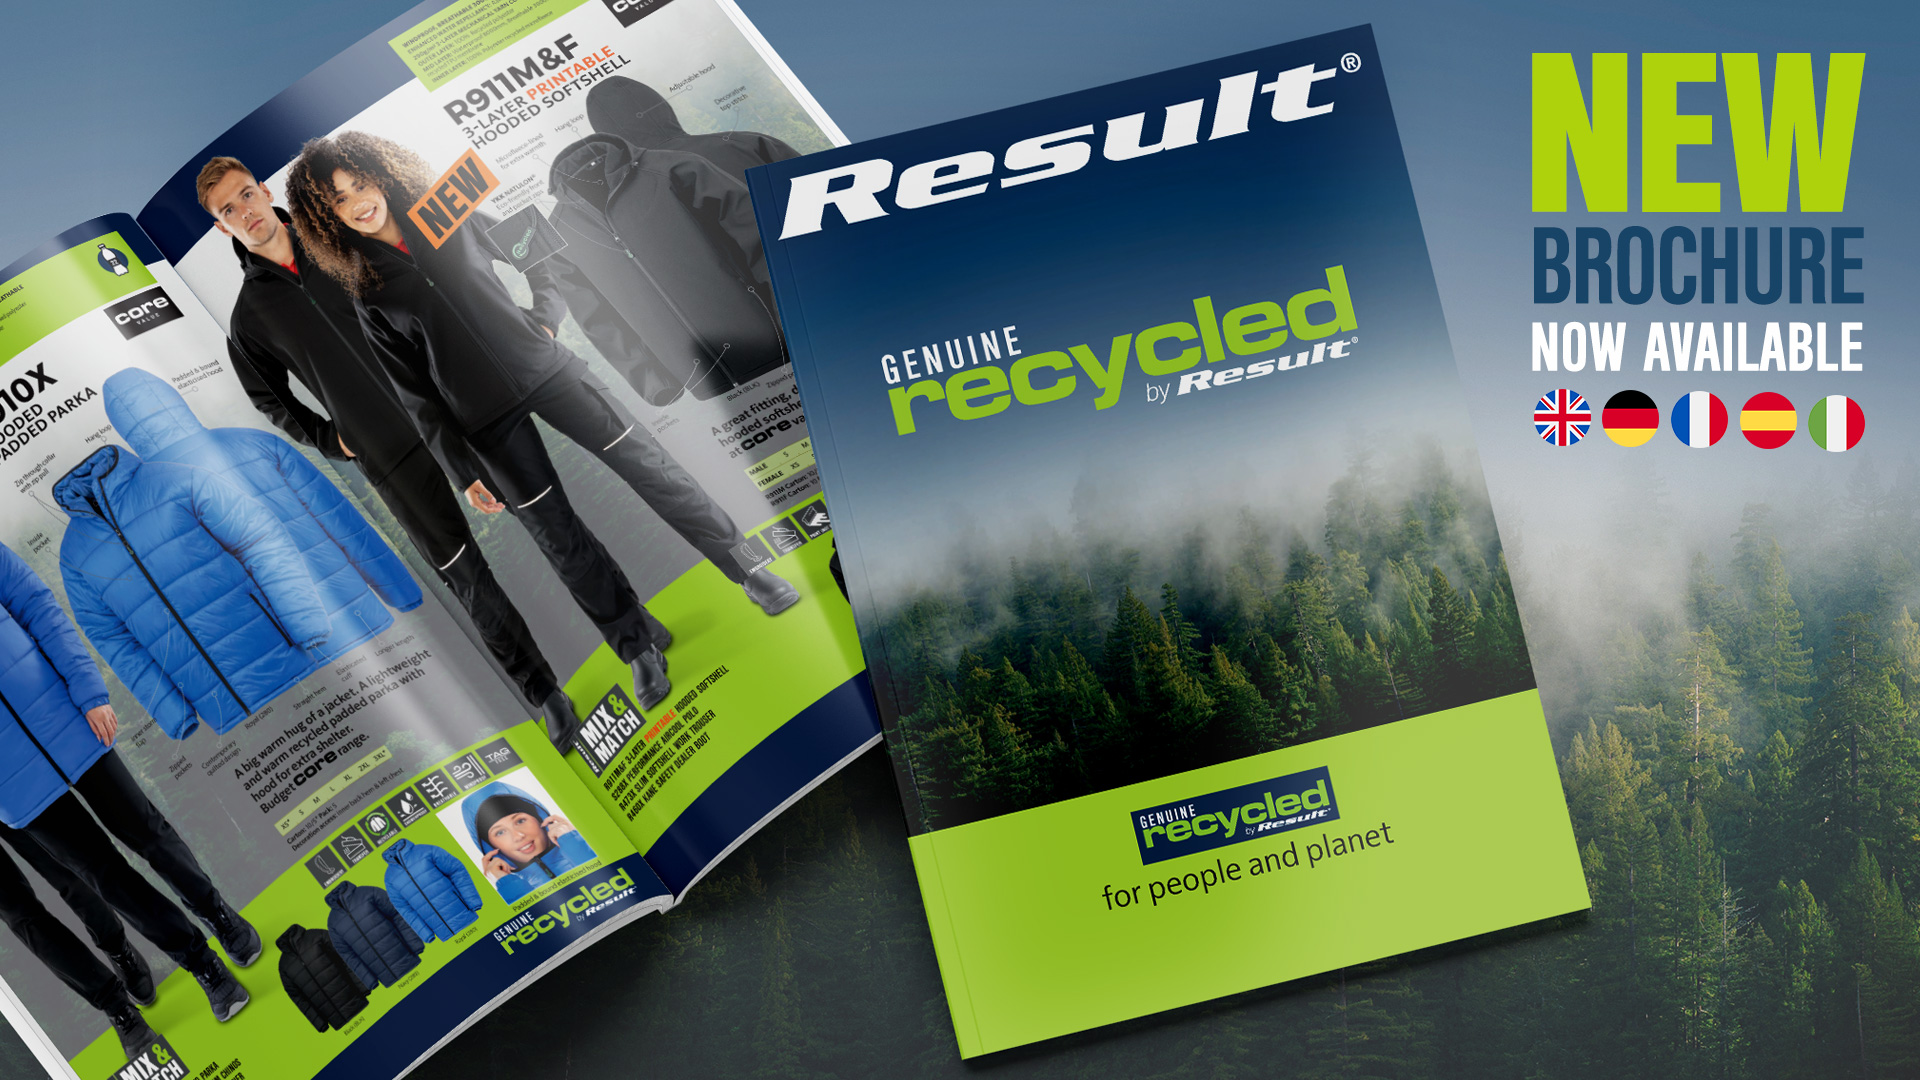 Result recycled new brochure graphic